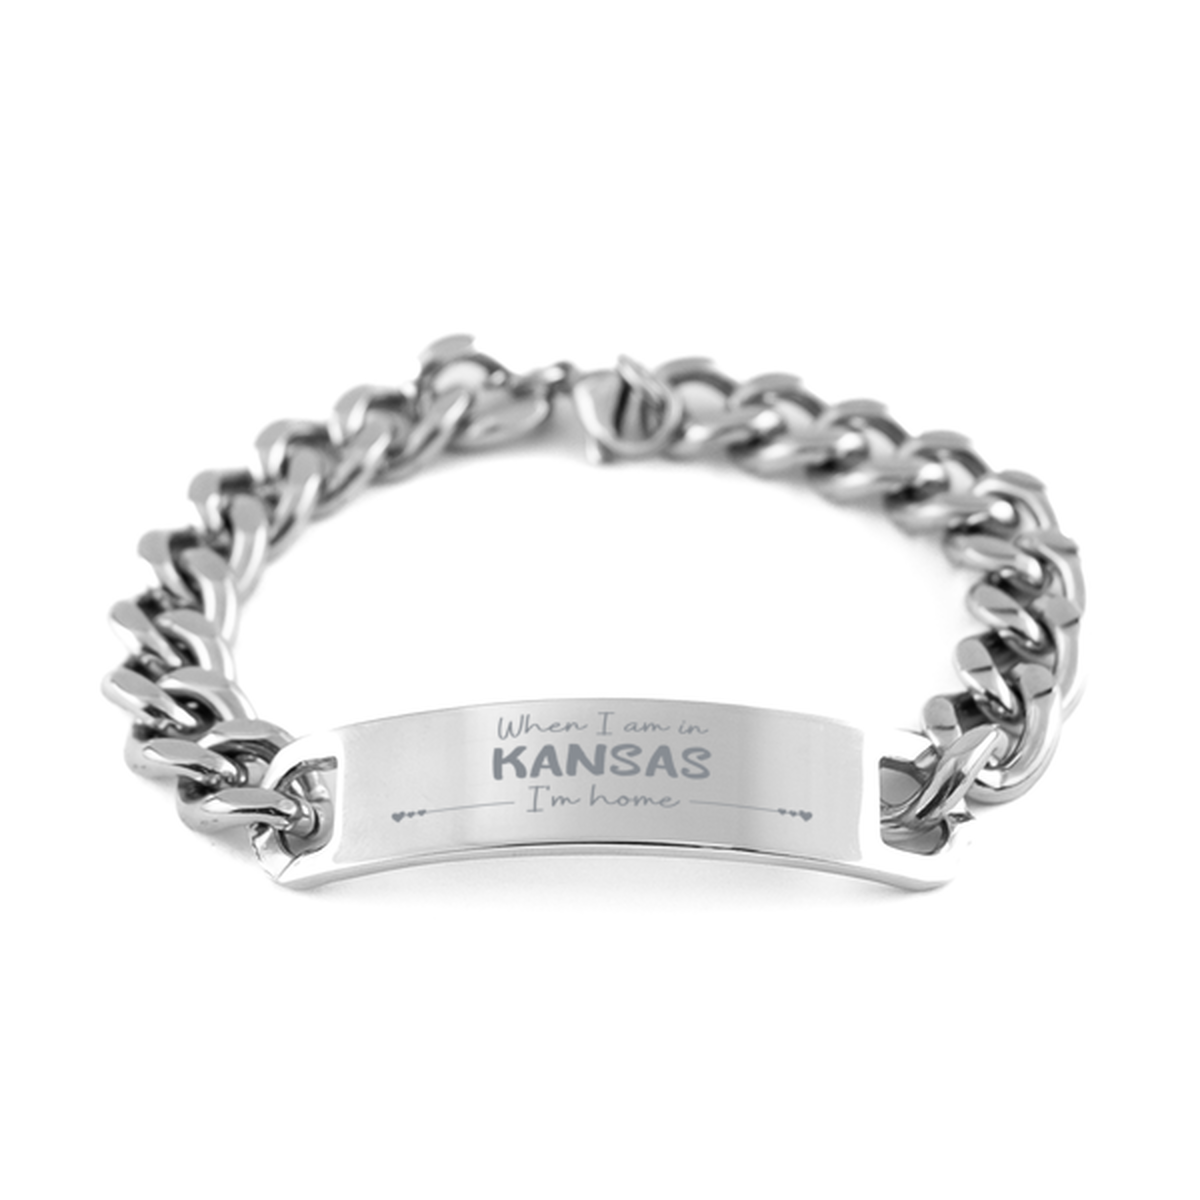 When I am in Kansas I'm home Cuban Chain Stainless Steel Bracelet, Cheap Gifts For Kansas, State Kansas Birthday Gifts for Friends Coworker